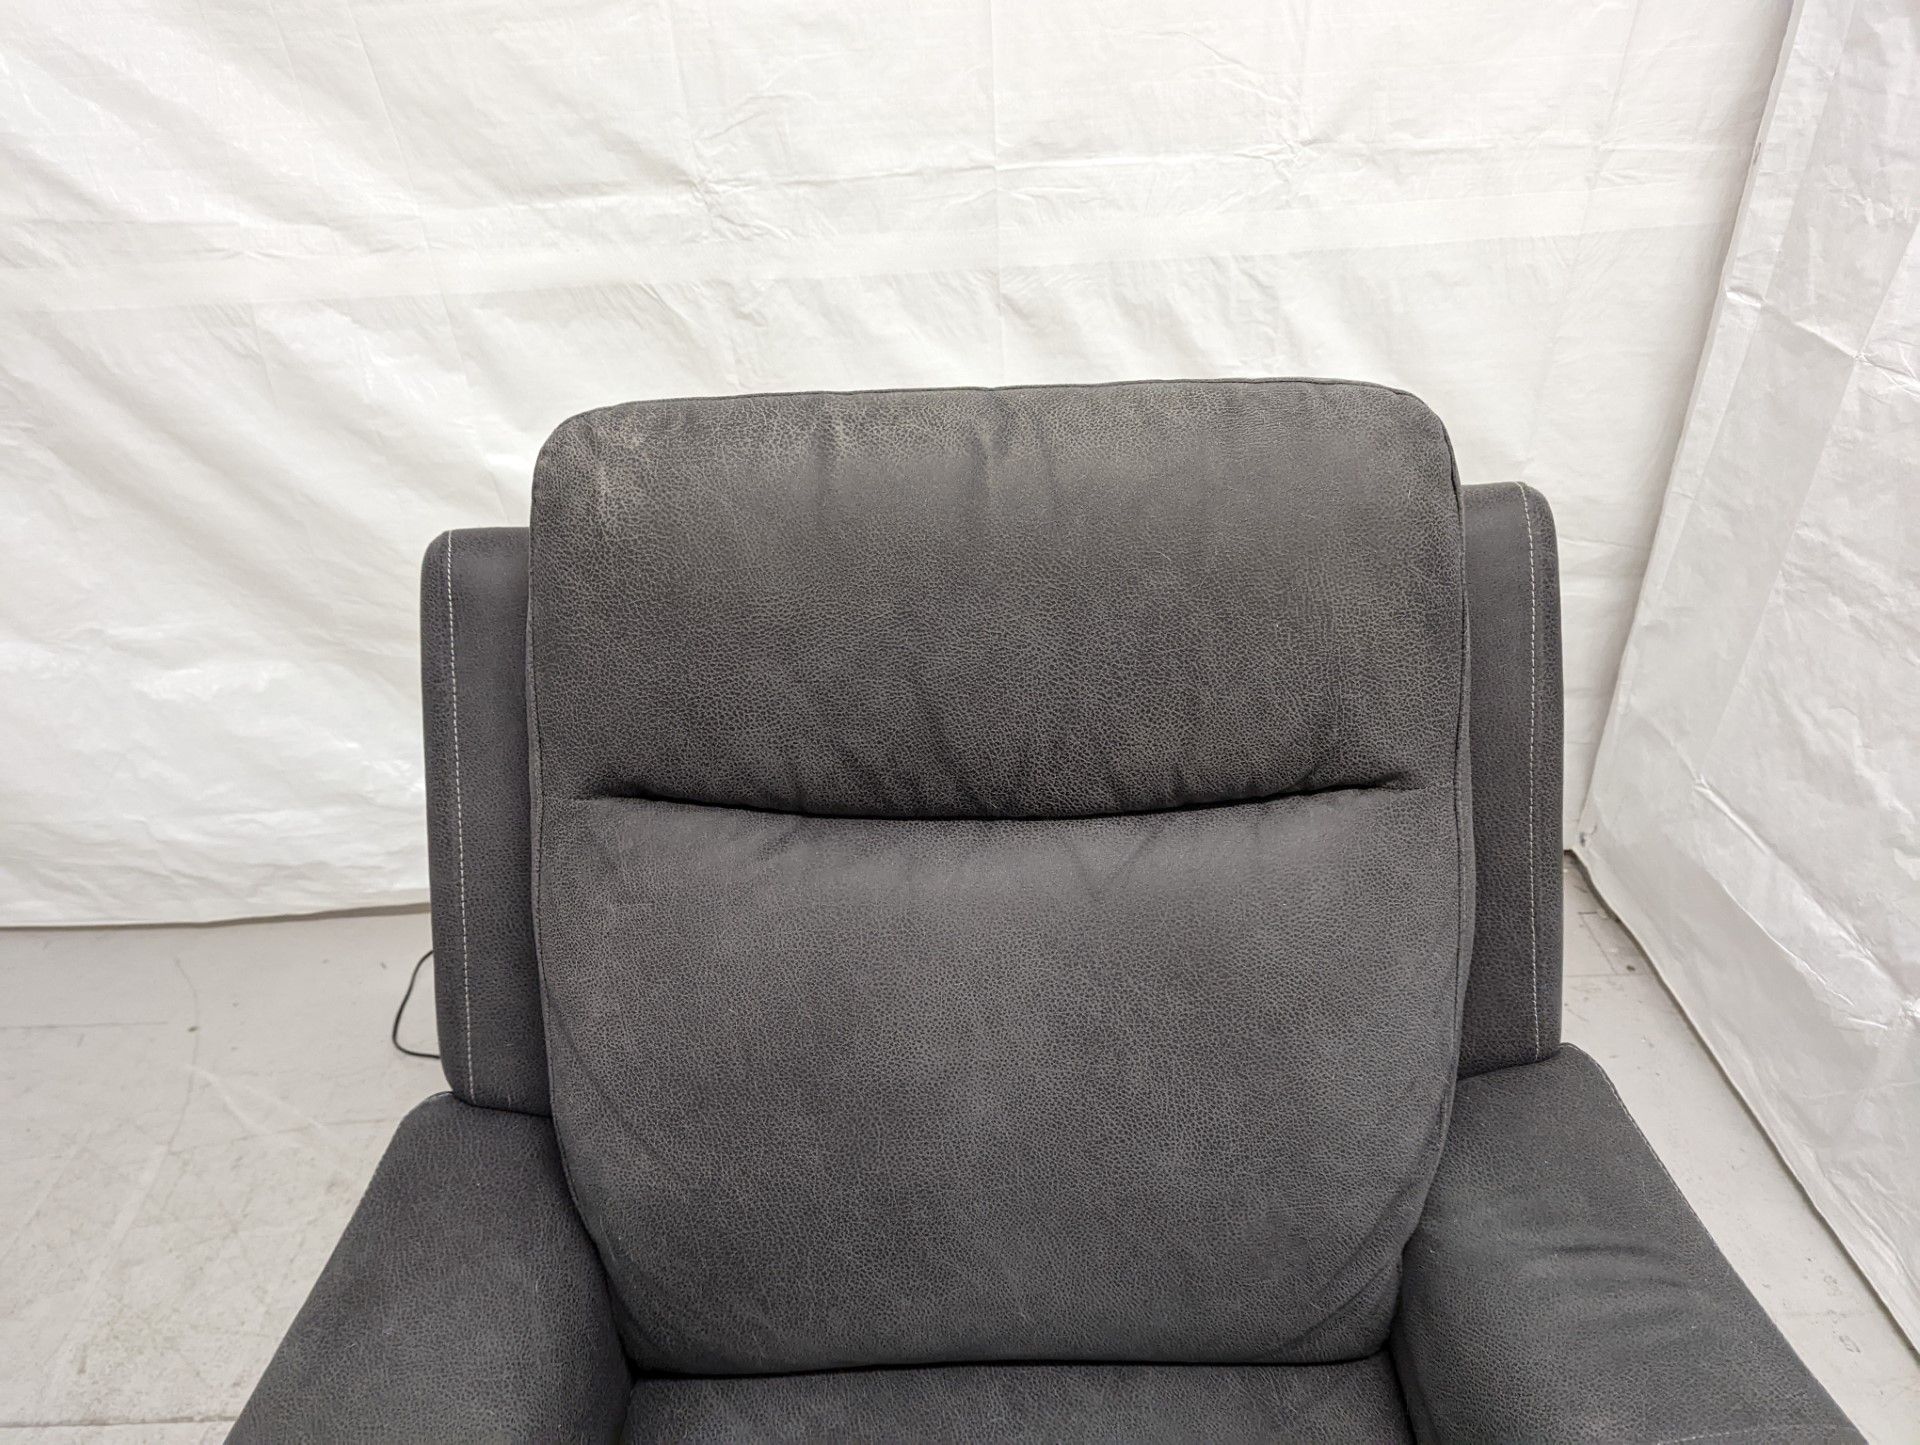 Endurance Morgan Power Recliner Chair Grey Kuka Black Plastic Feet Kuka RRP 696About the Product(s) - Image 2 of 2